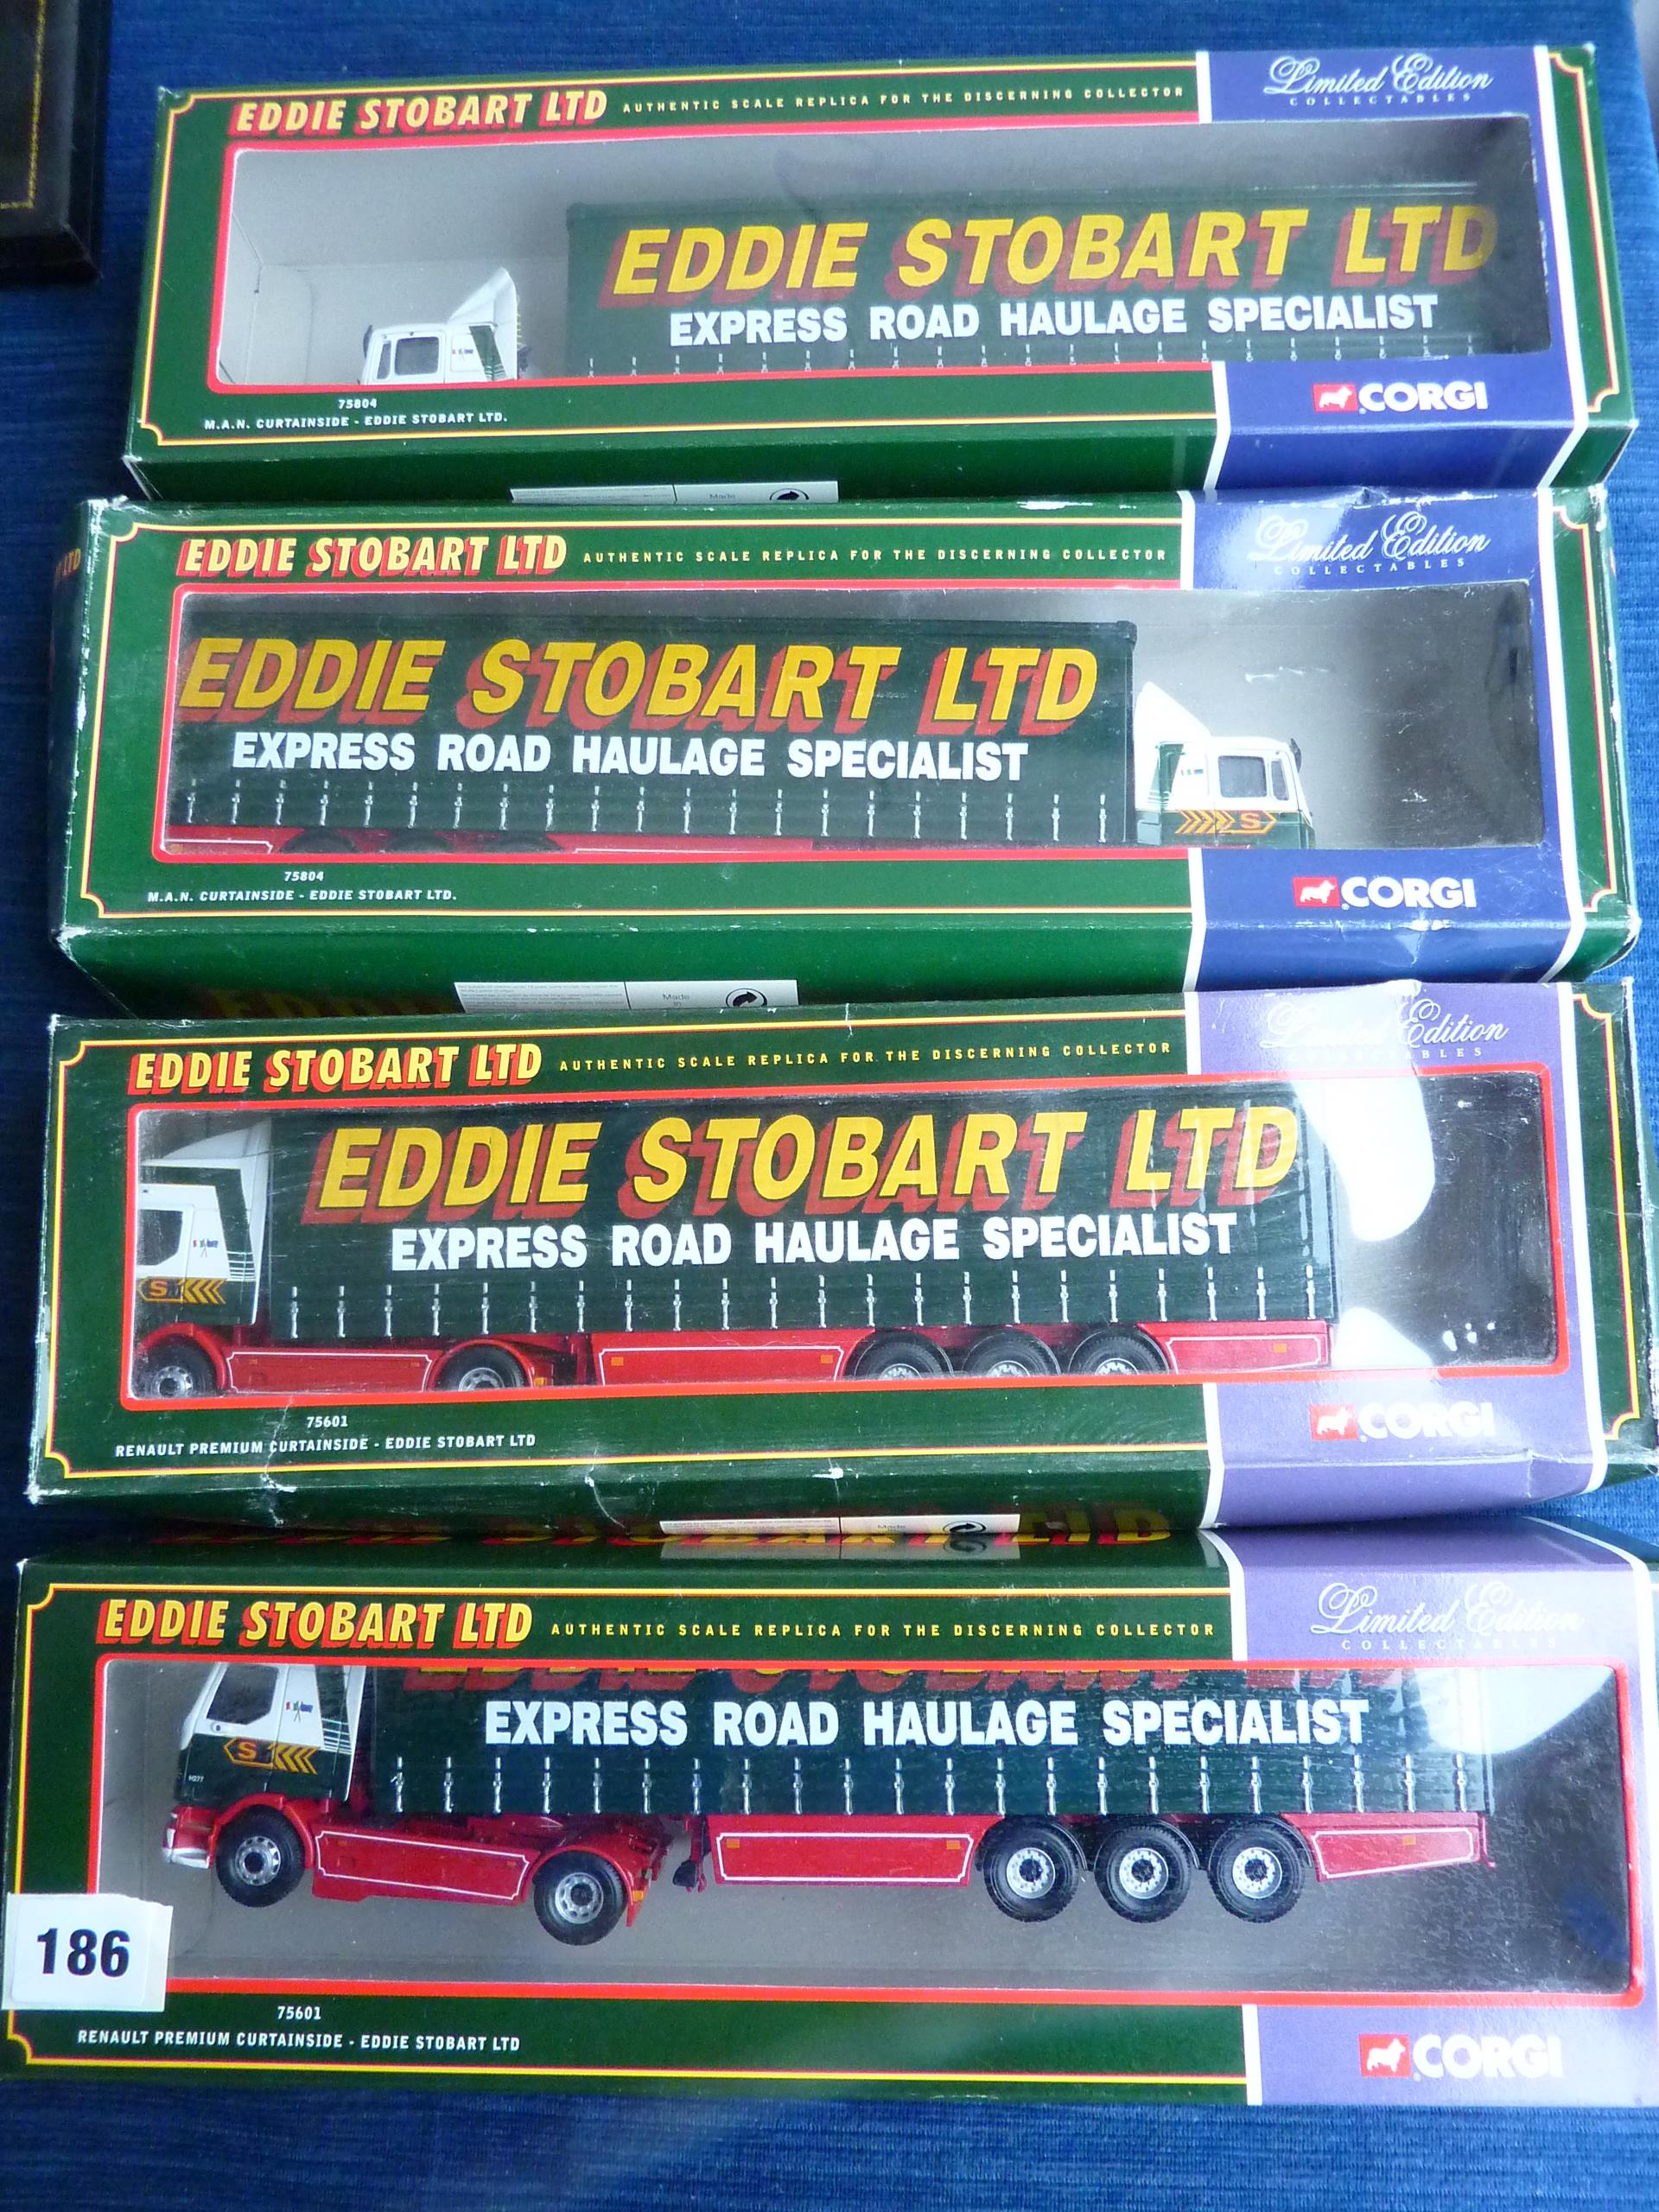 CORGI LARGER SCALE LORRIES 75804 MAN CURTAINSIDE X2, AND 75601 RENAULT CURTAINSIDE X2, BOTH BOXED